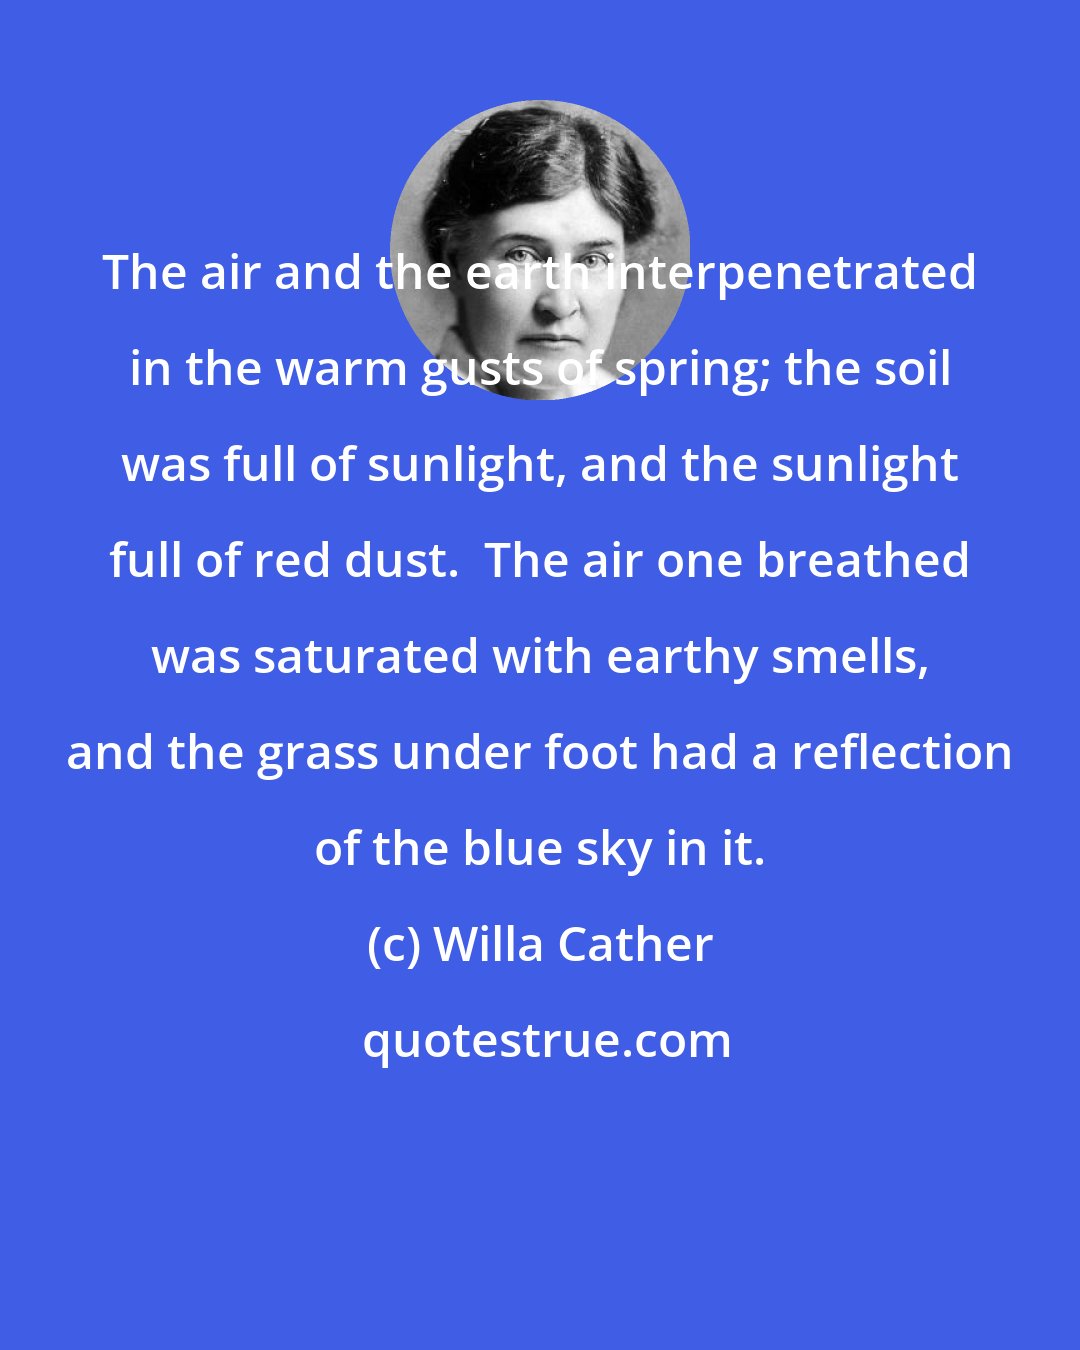 Willa Cather: The air and the earth interpenetrated in the warm gusts of spring; the soil was full of sunlight, and the sunlight full of red dust.  The air one breathed was saturated with earthy smells, and the grass under foot had a reflection of the blue sky in it.